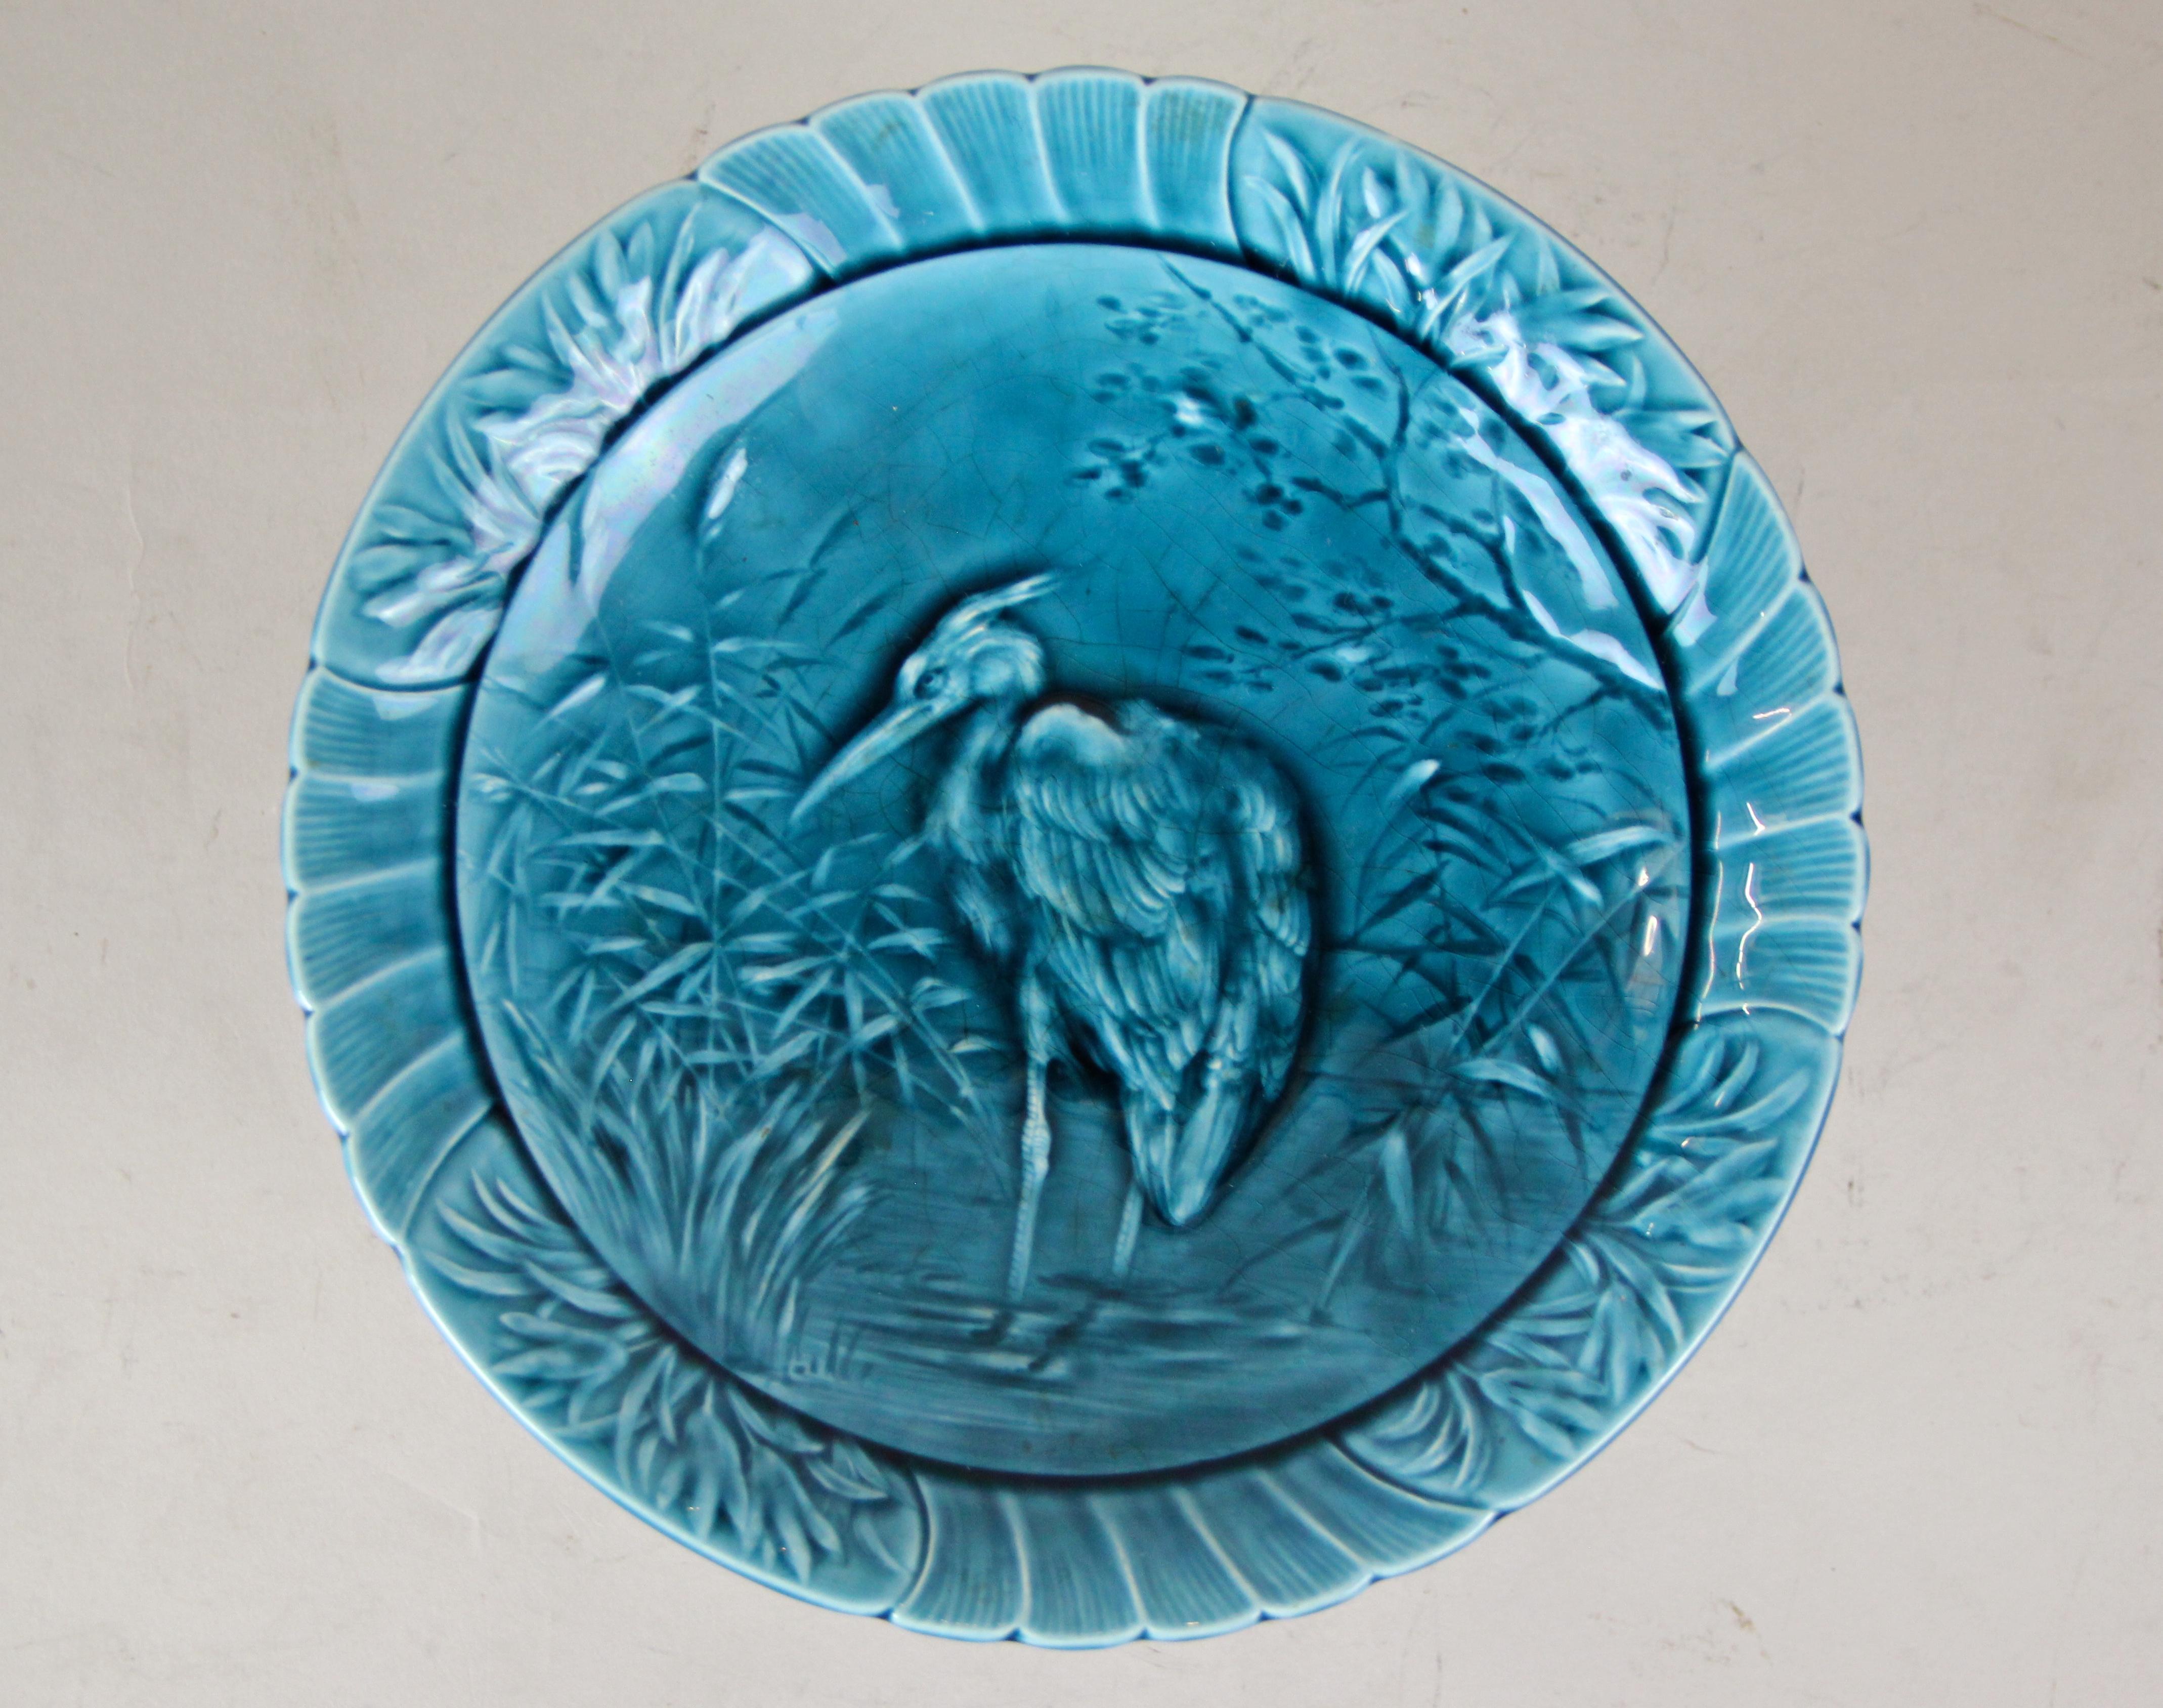 Mesmerizing Majolica Centerpiece made by Sarreguemines in France, circa 1915. A very decorative piece of Majolica art depicting a heron on the top plate. Designed with much love to details this early 20th century Majolica centerpiece convinces with